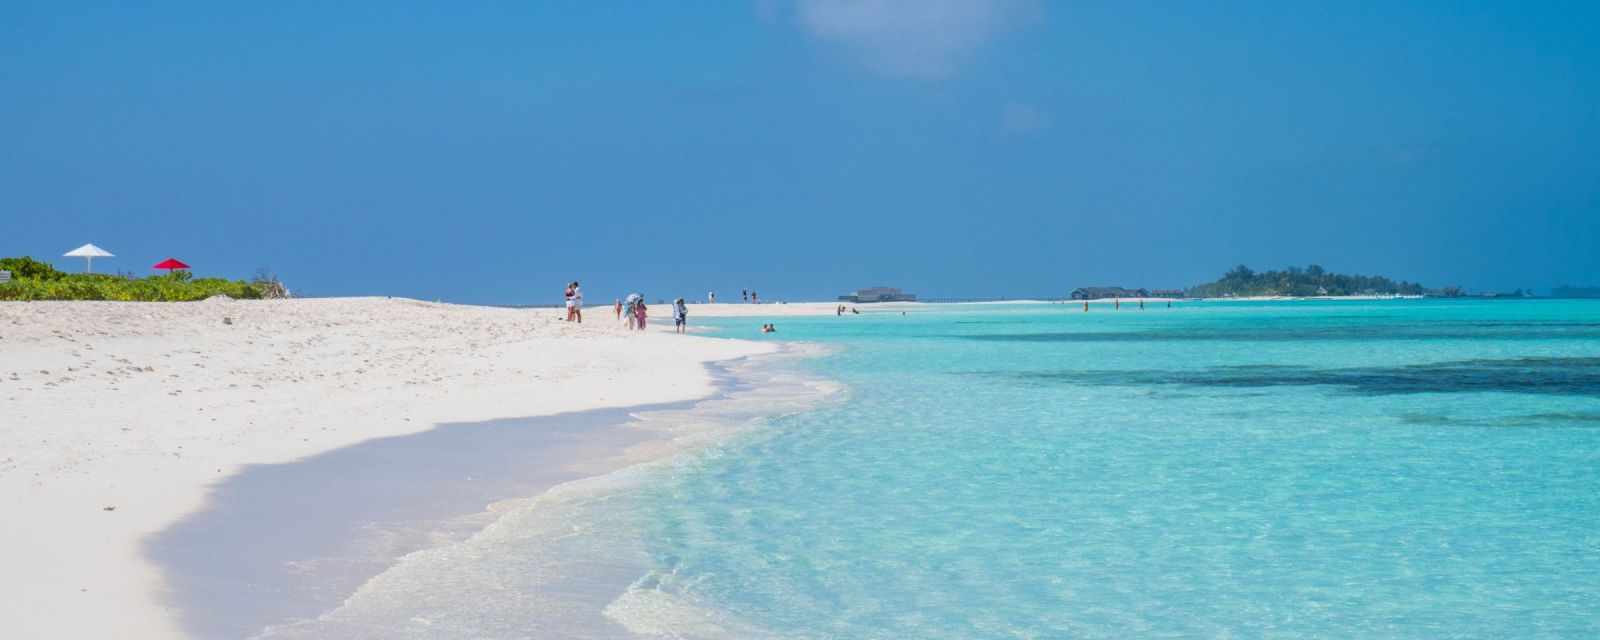 Beach and Sandbank and crystal clear sea from Dhigurah in the Maldives